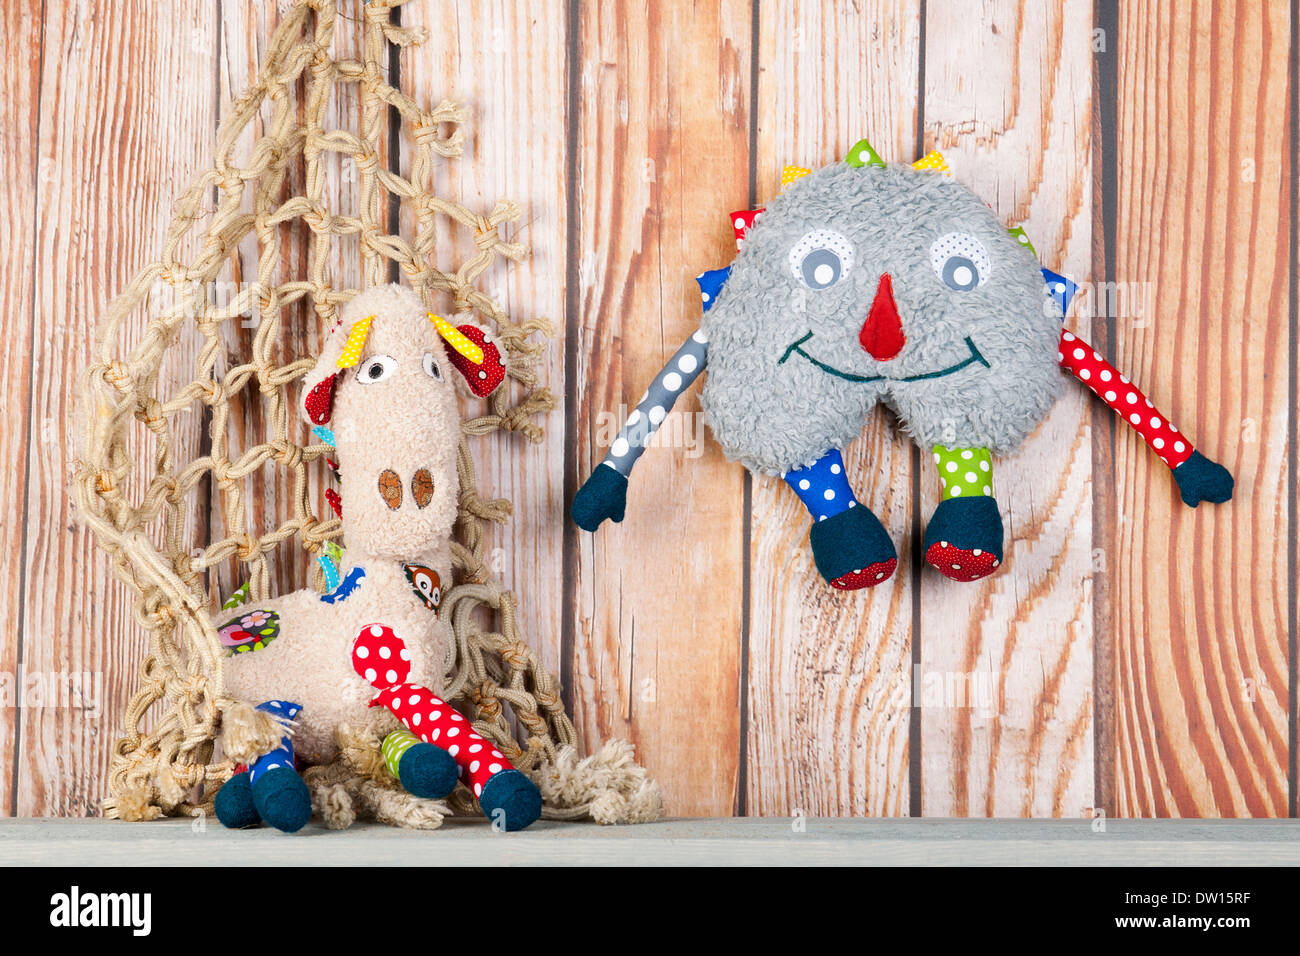 Stuffed colorful handmade funny toys at home on wooden background Stock Photo